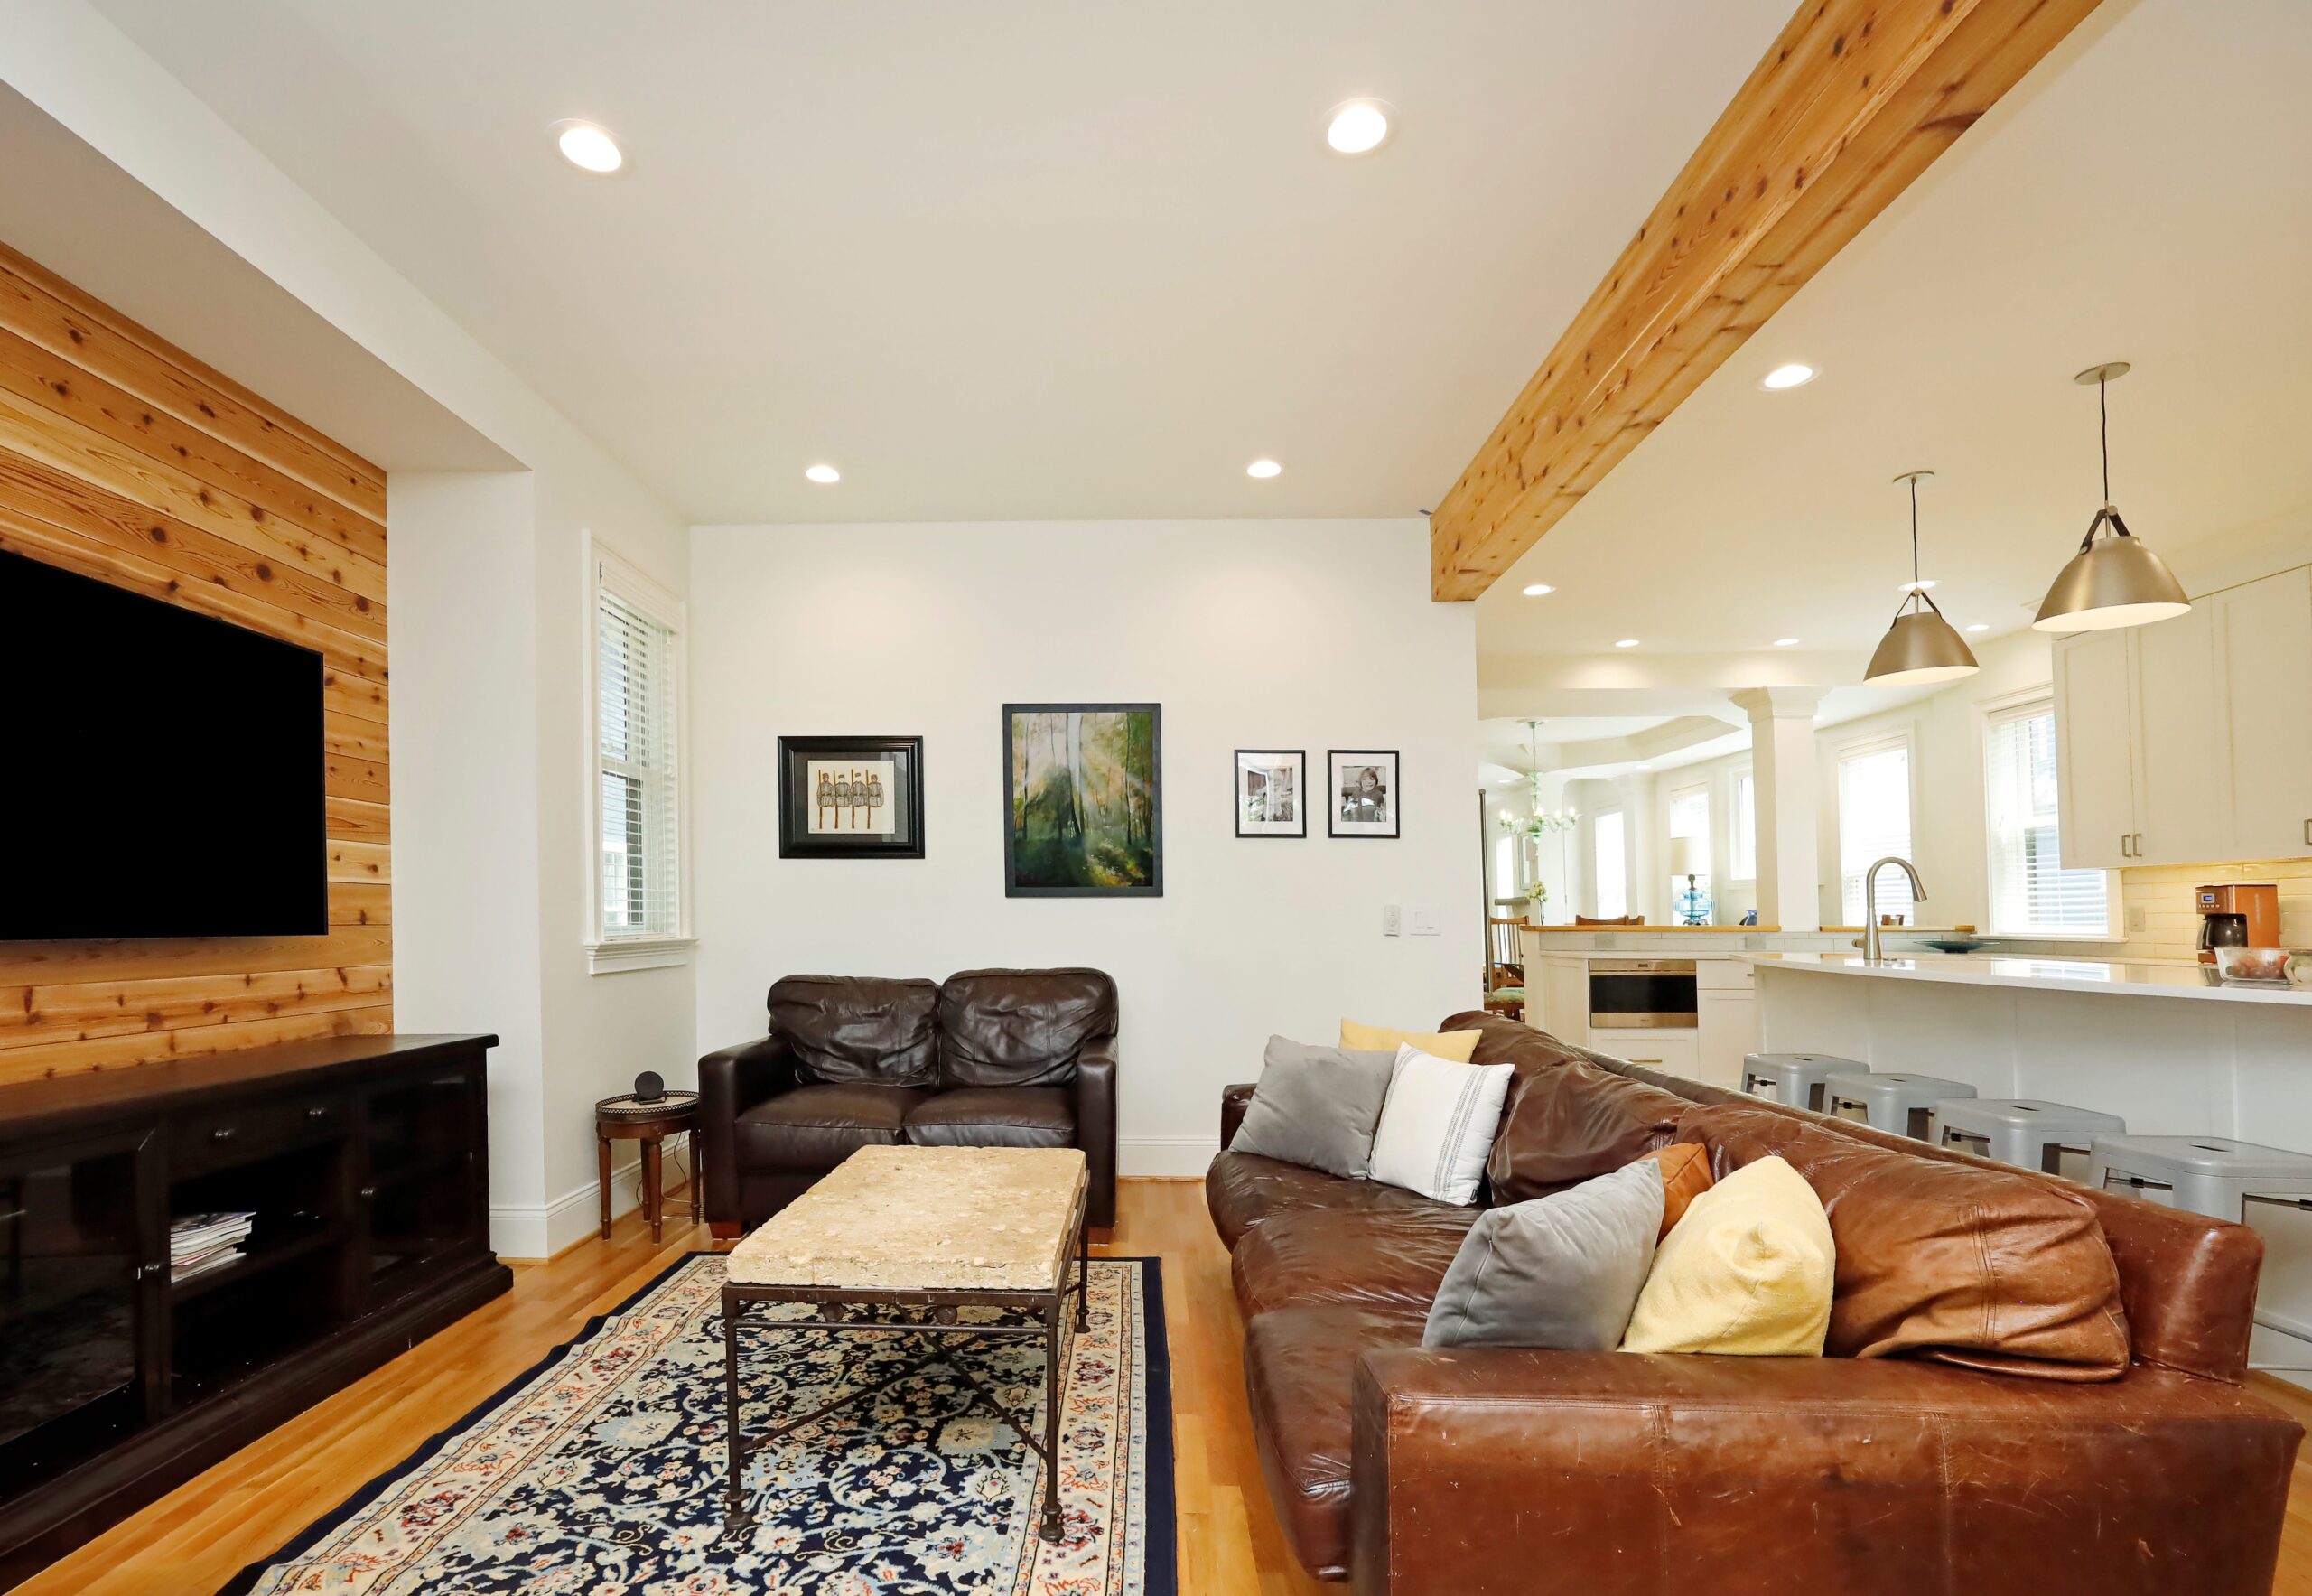 The living room, directly adjacent to the kitchen, benefits in spaciousness from the open-concept plan. It feels visually distinct because of a wooden dropped beam and cozy heart-pine wall finish along the entertainment center niche.